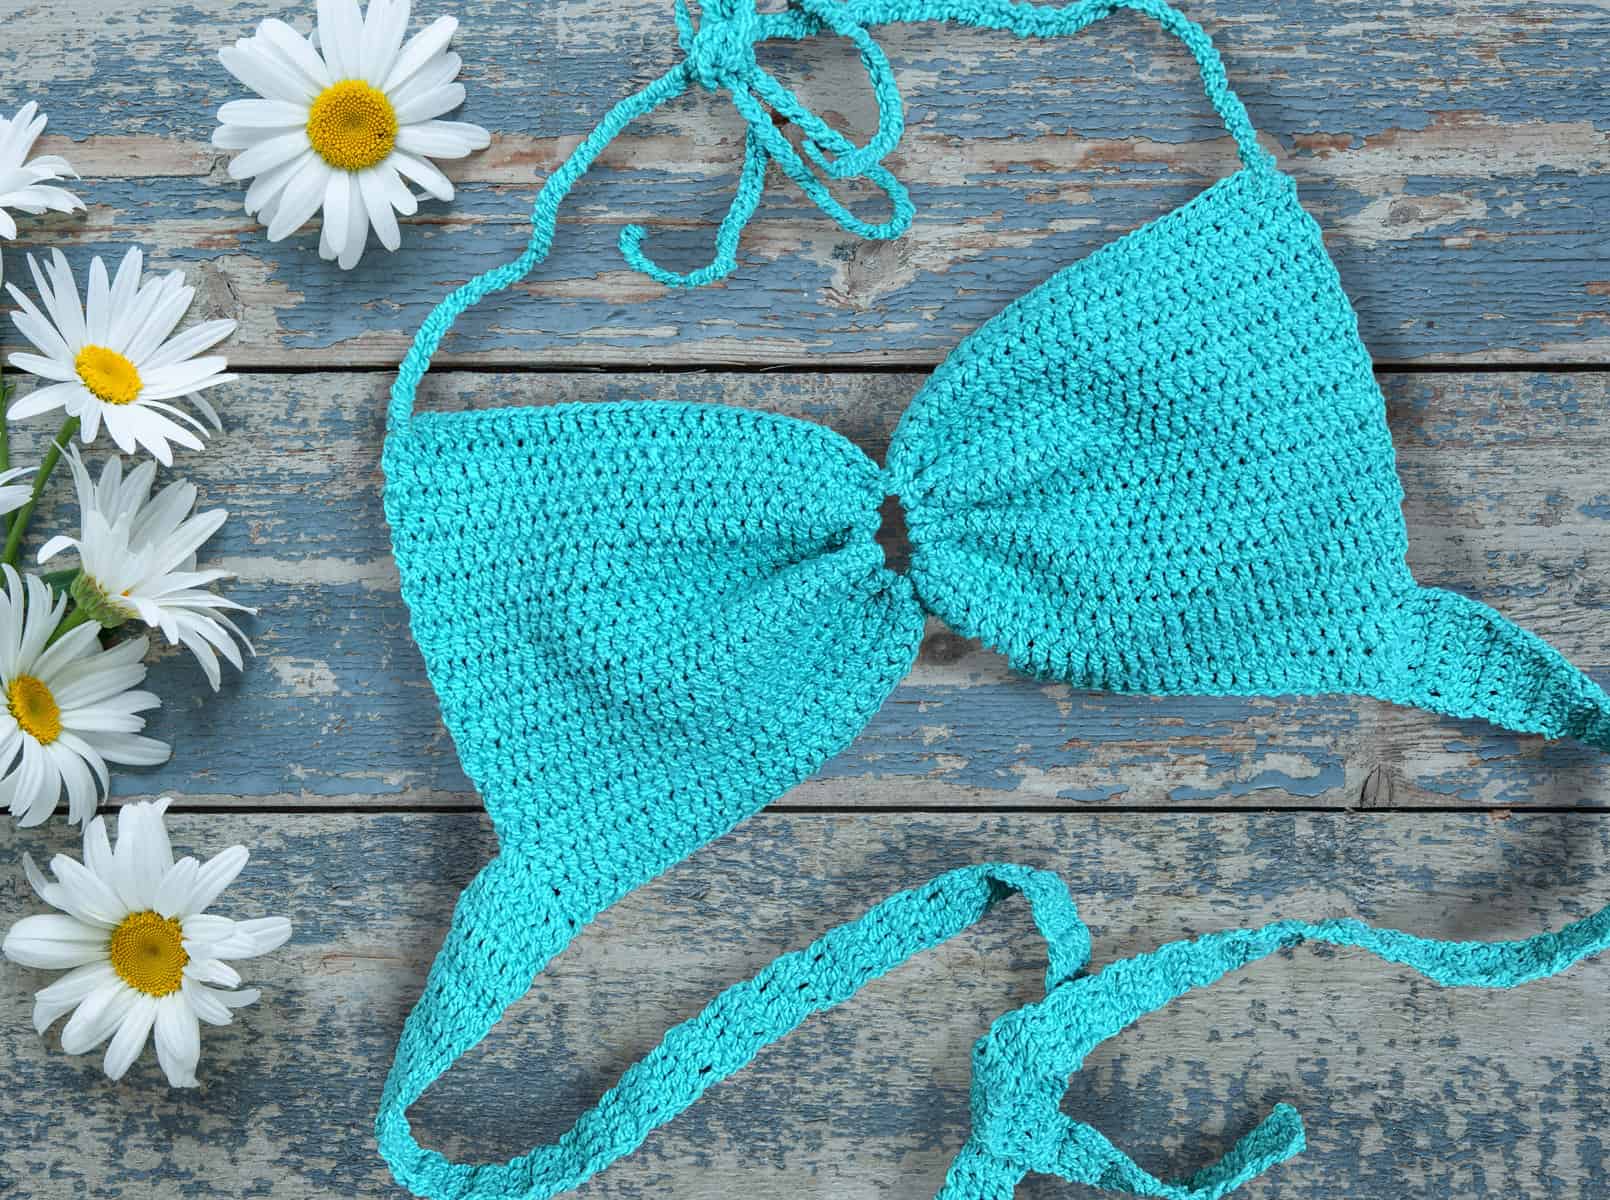 Daisy flowers and crochet bralette on old wooden background